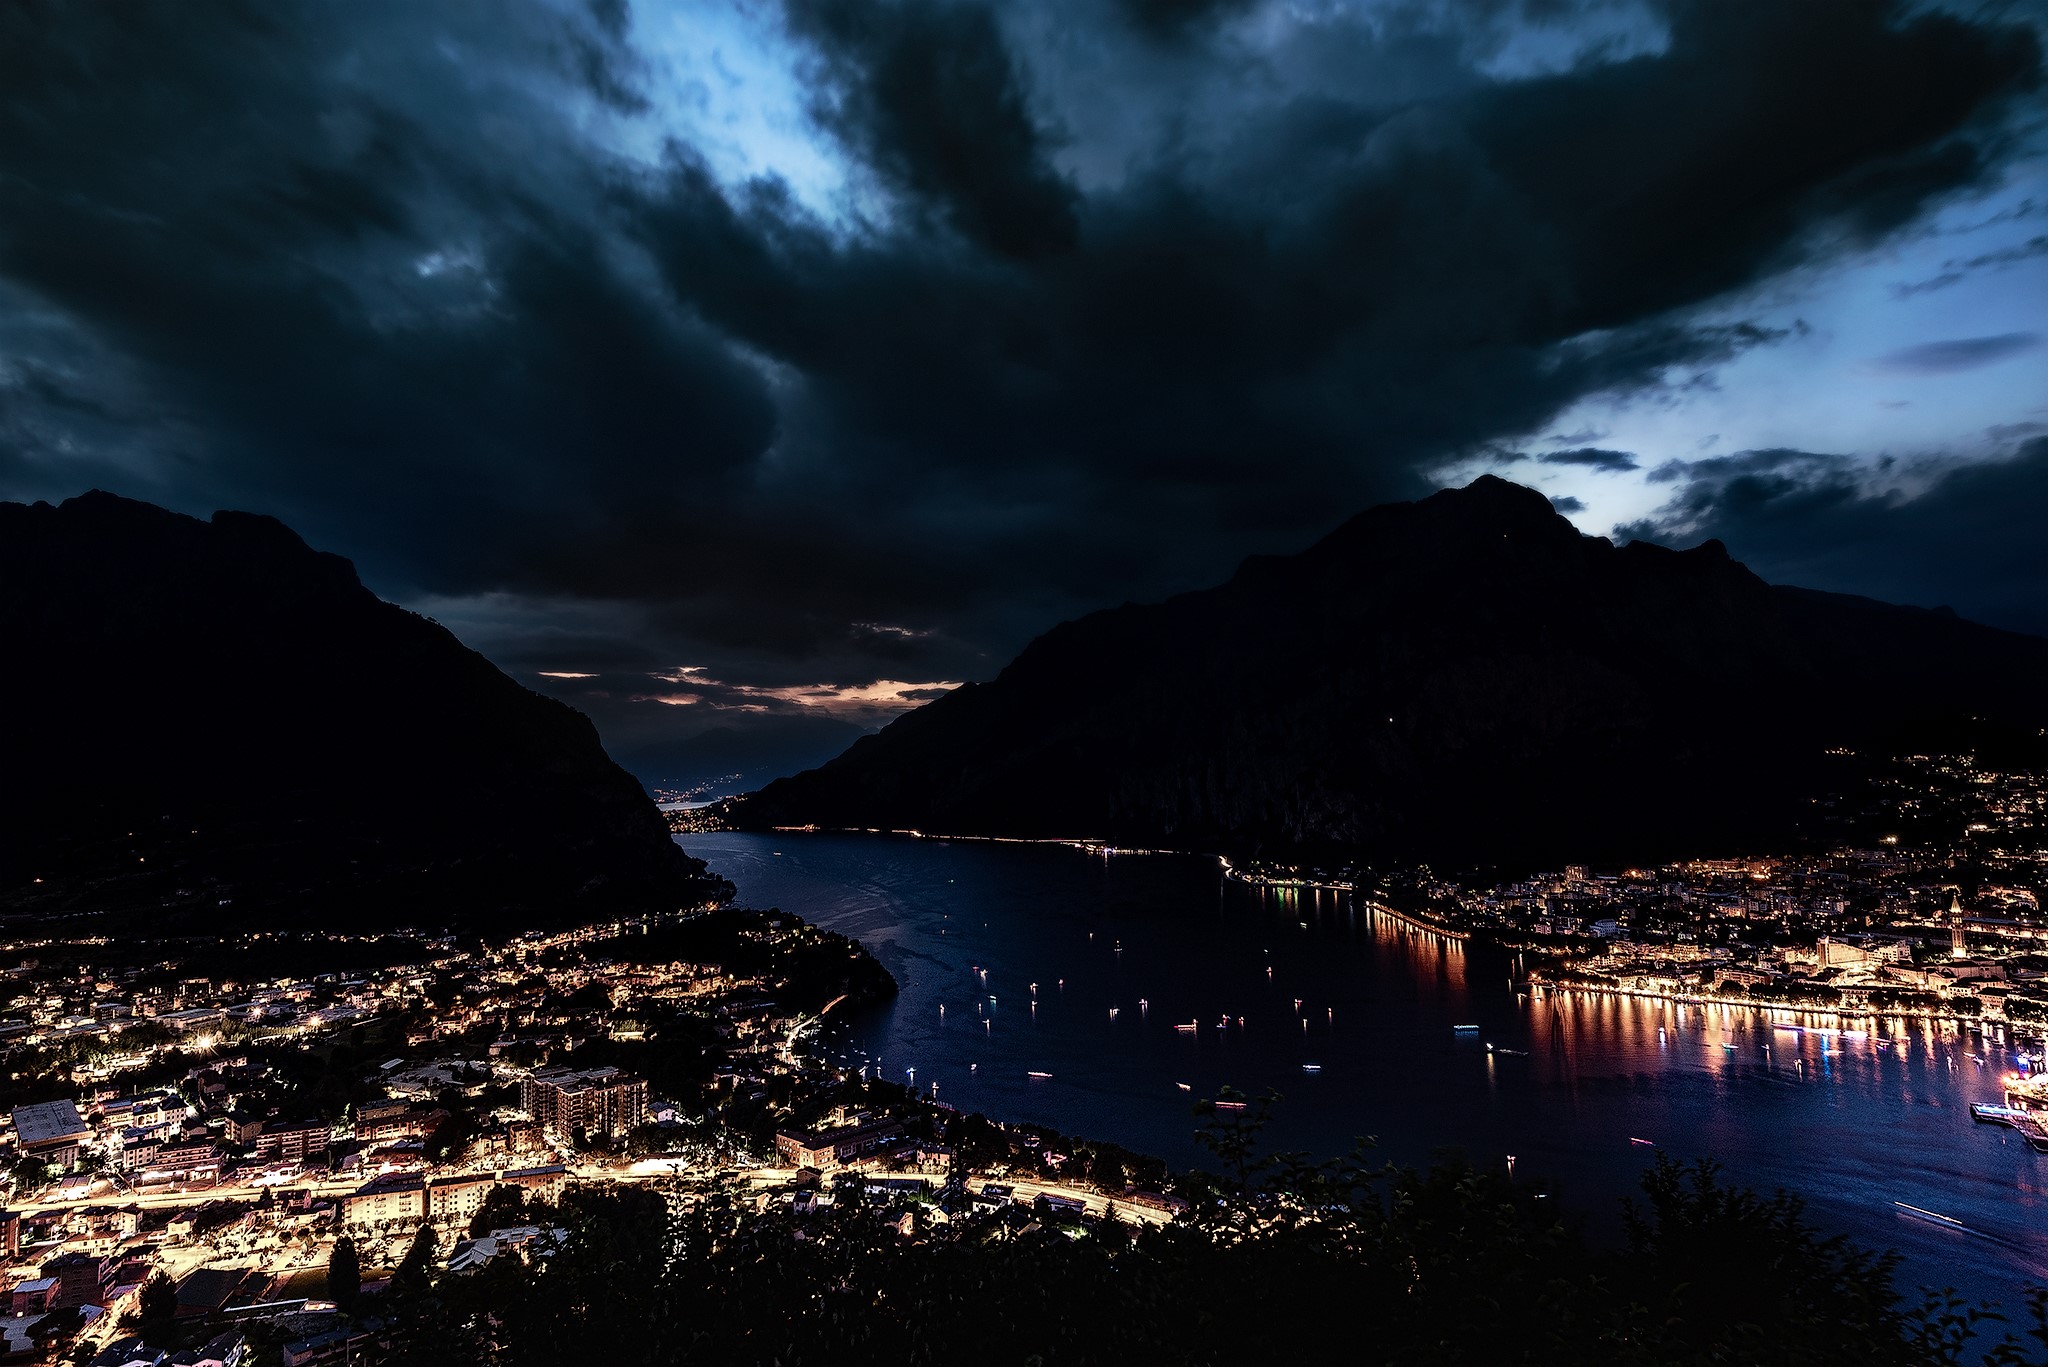 The Night of Lecco...